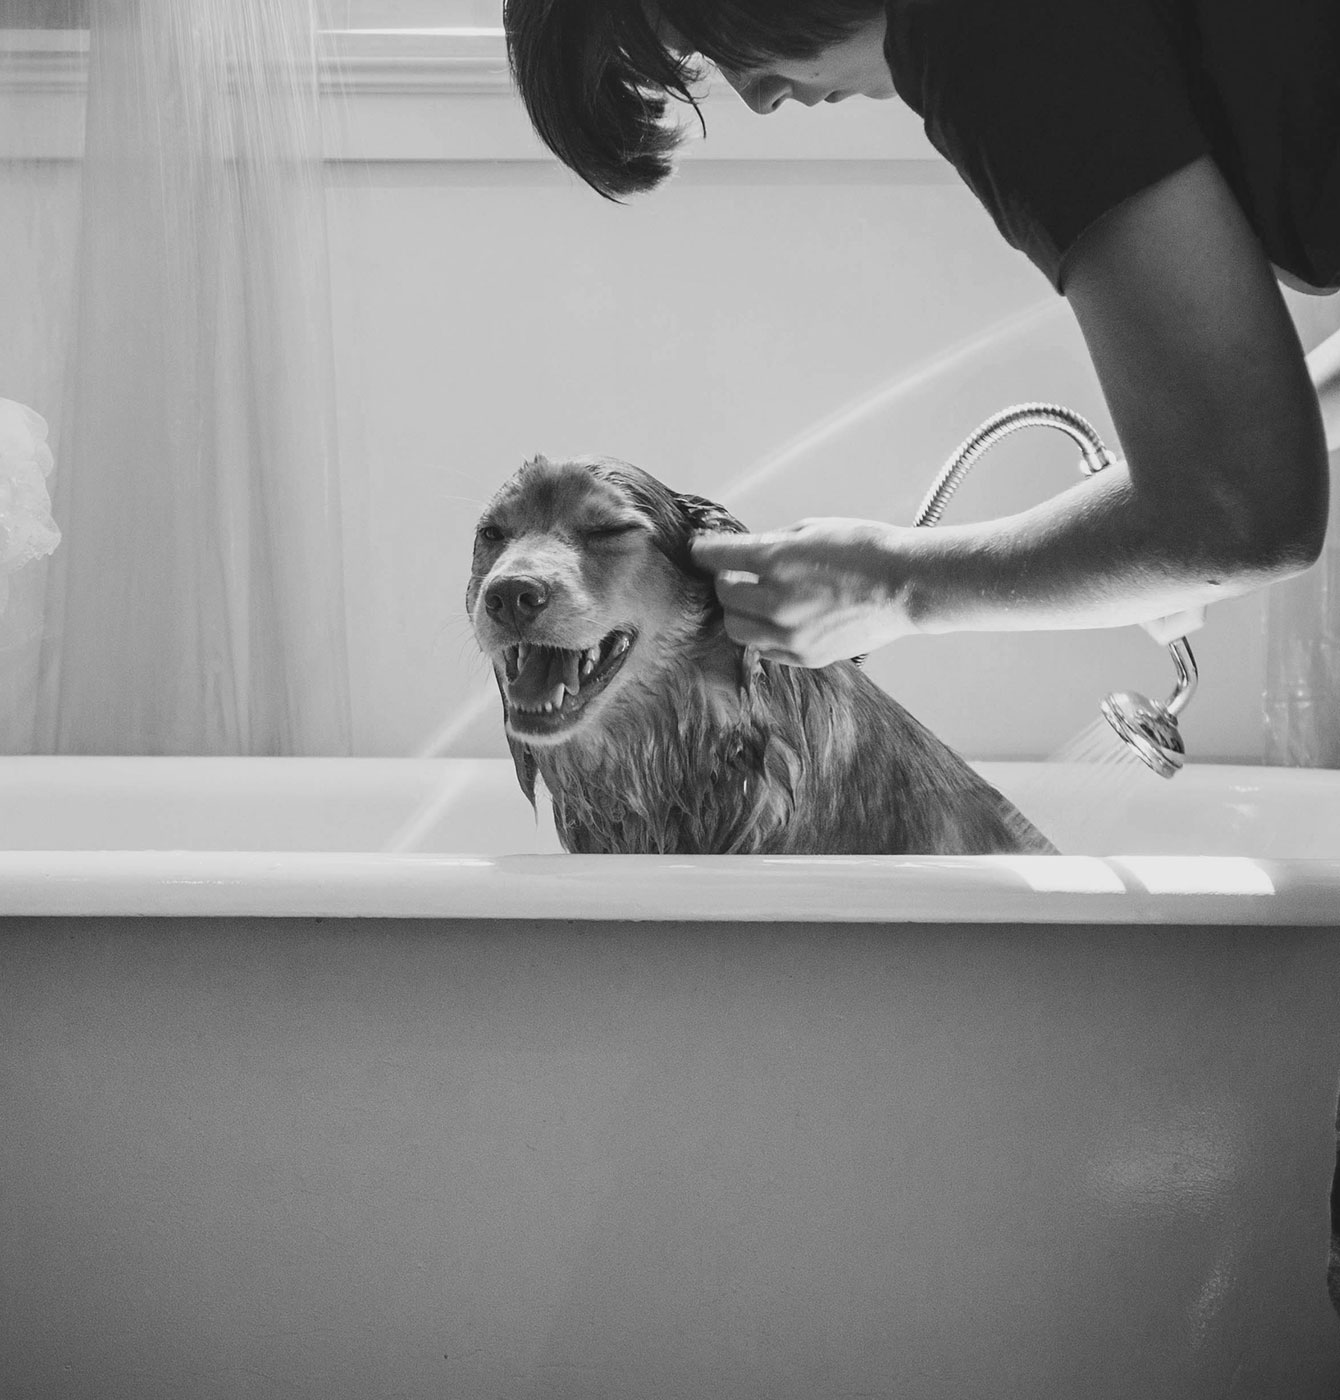 Photograph of someone bathing their dog in the bathtub